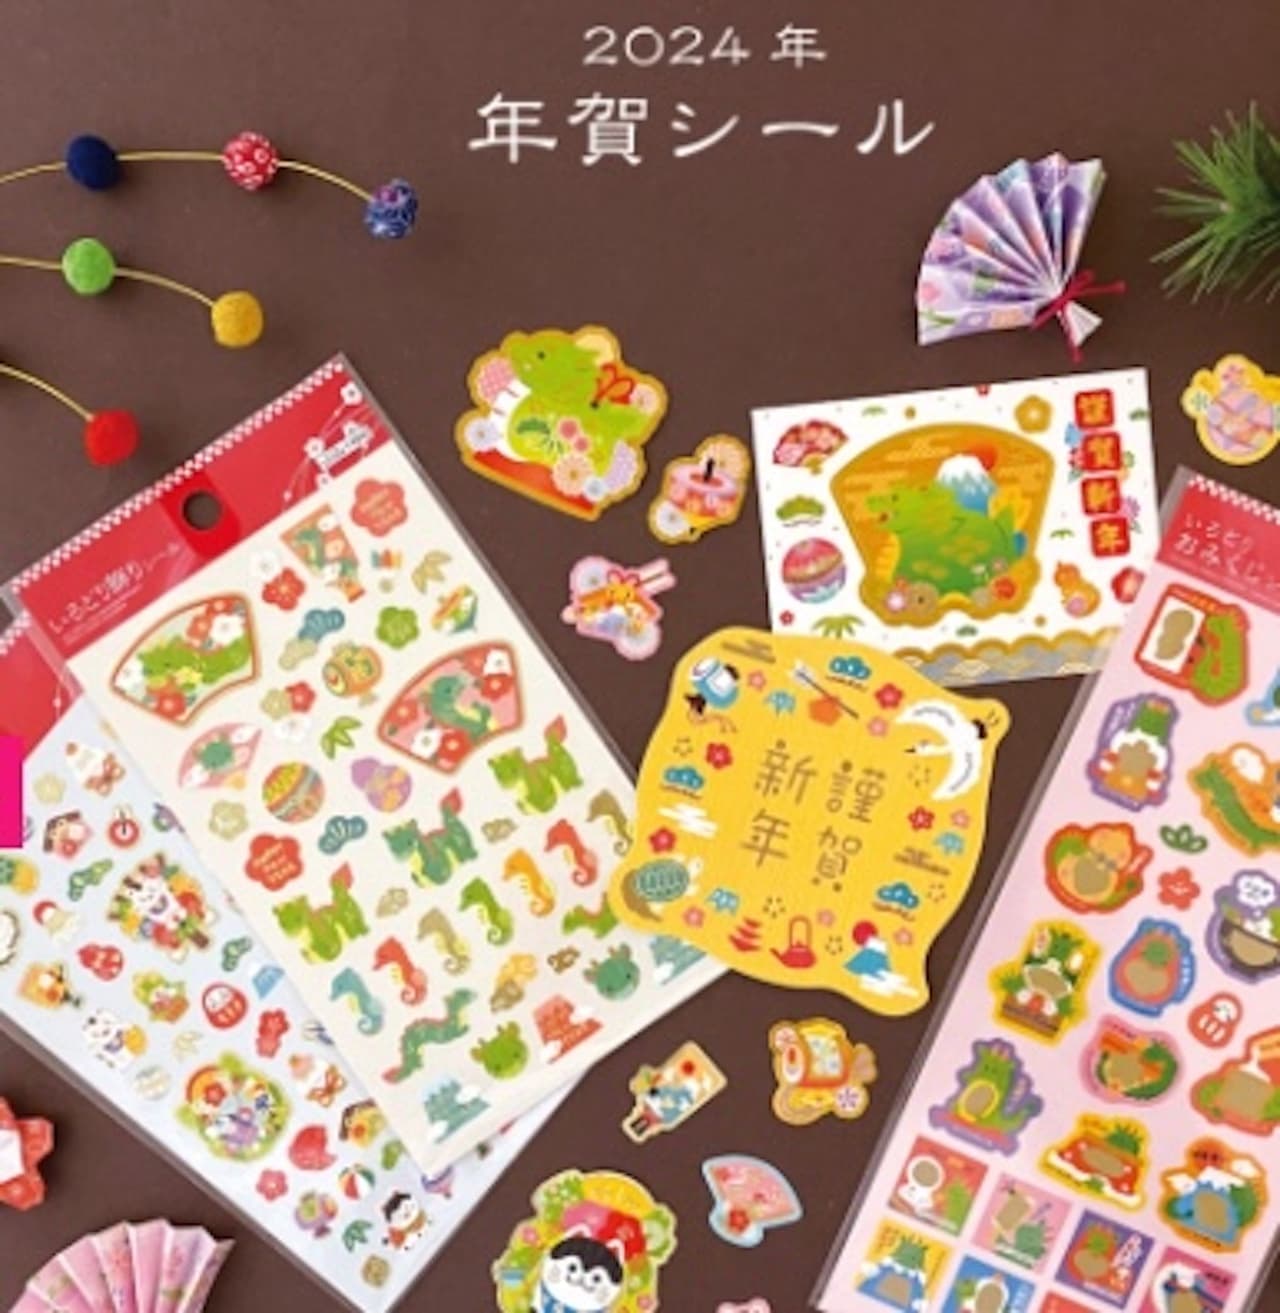 Daiso "New Year's greeting stickers